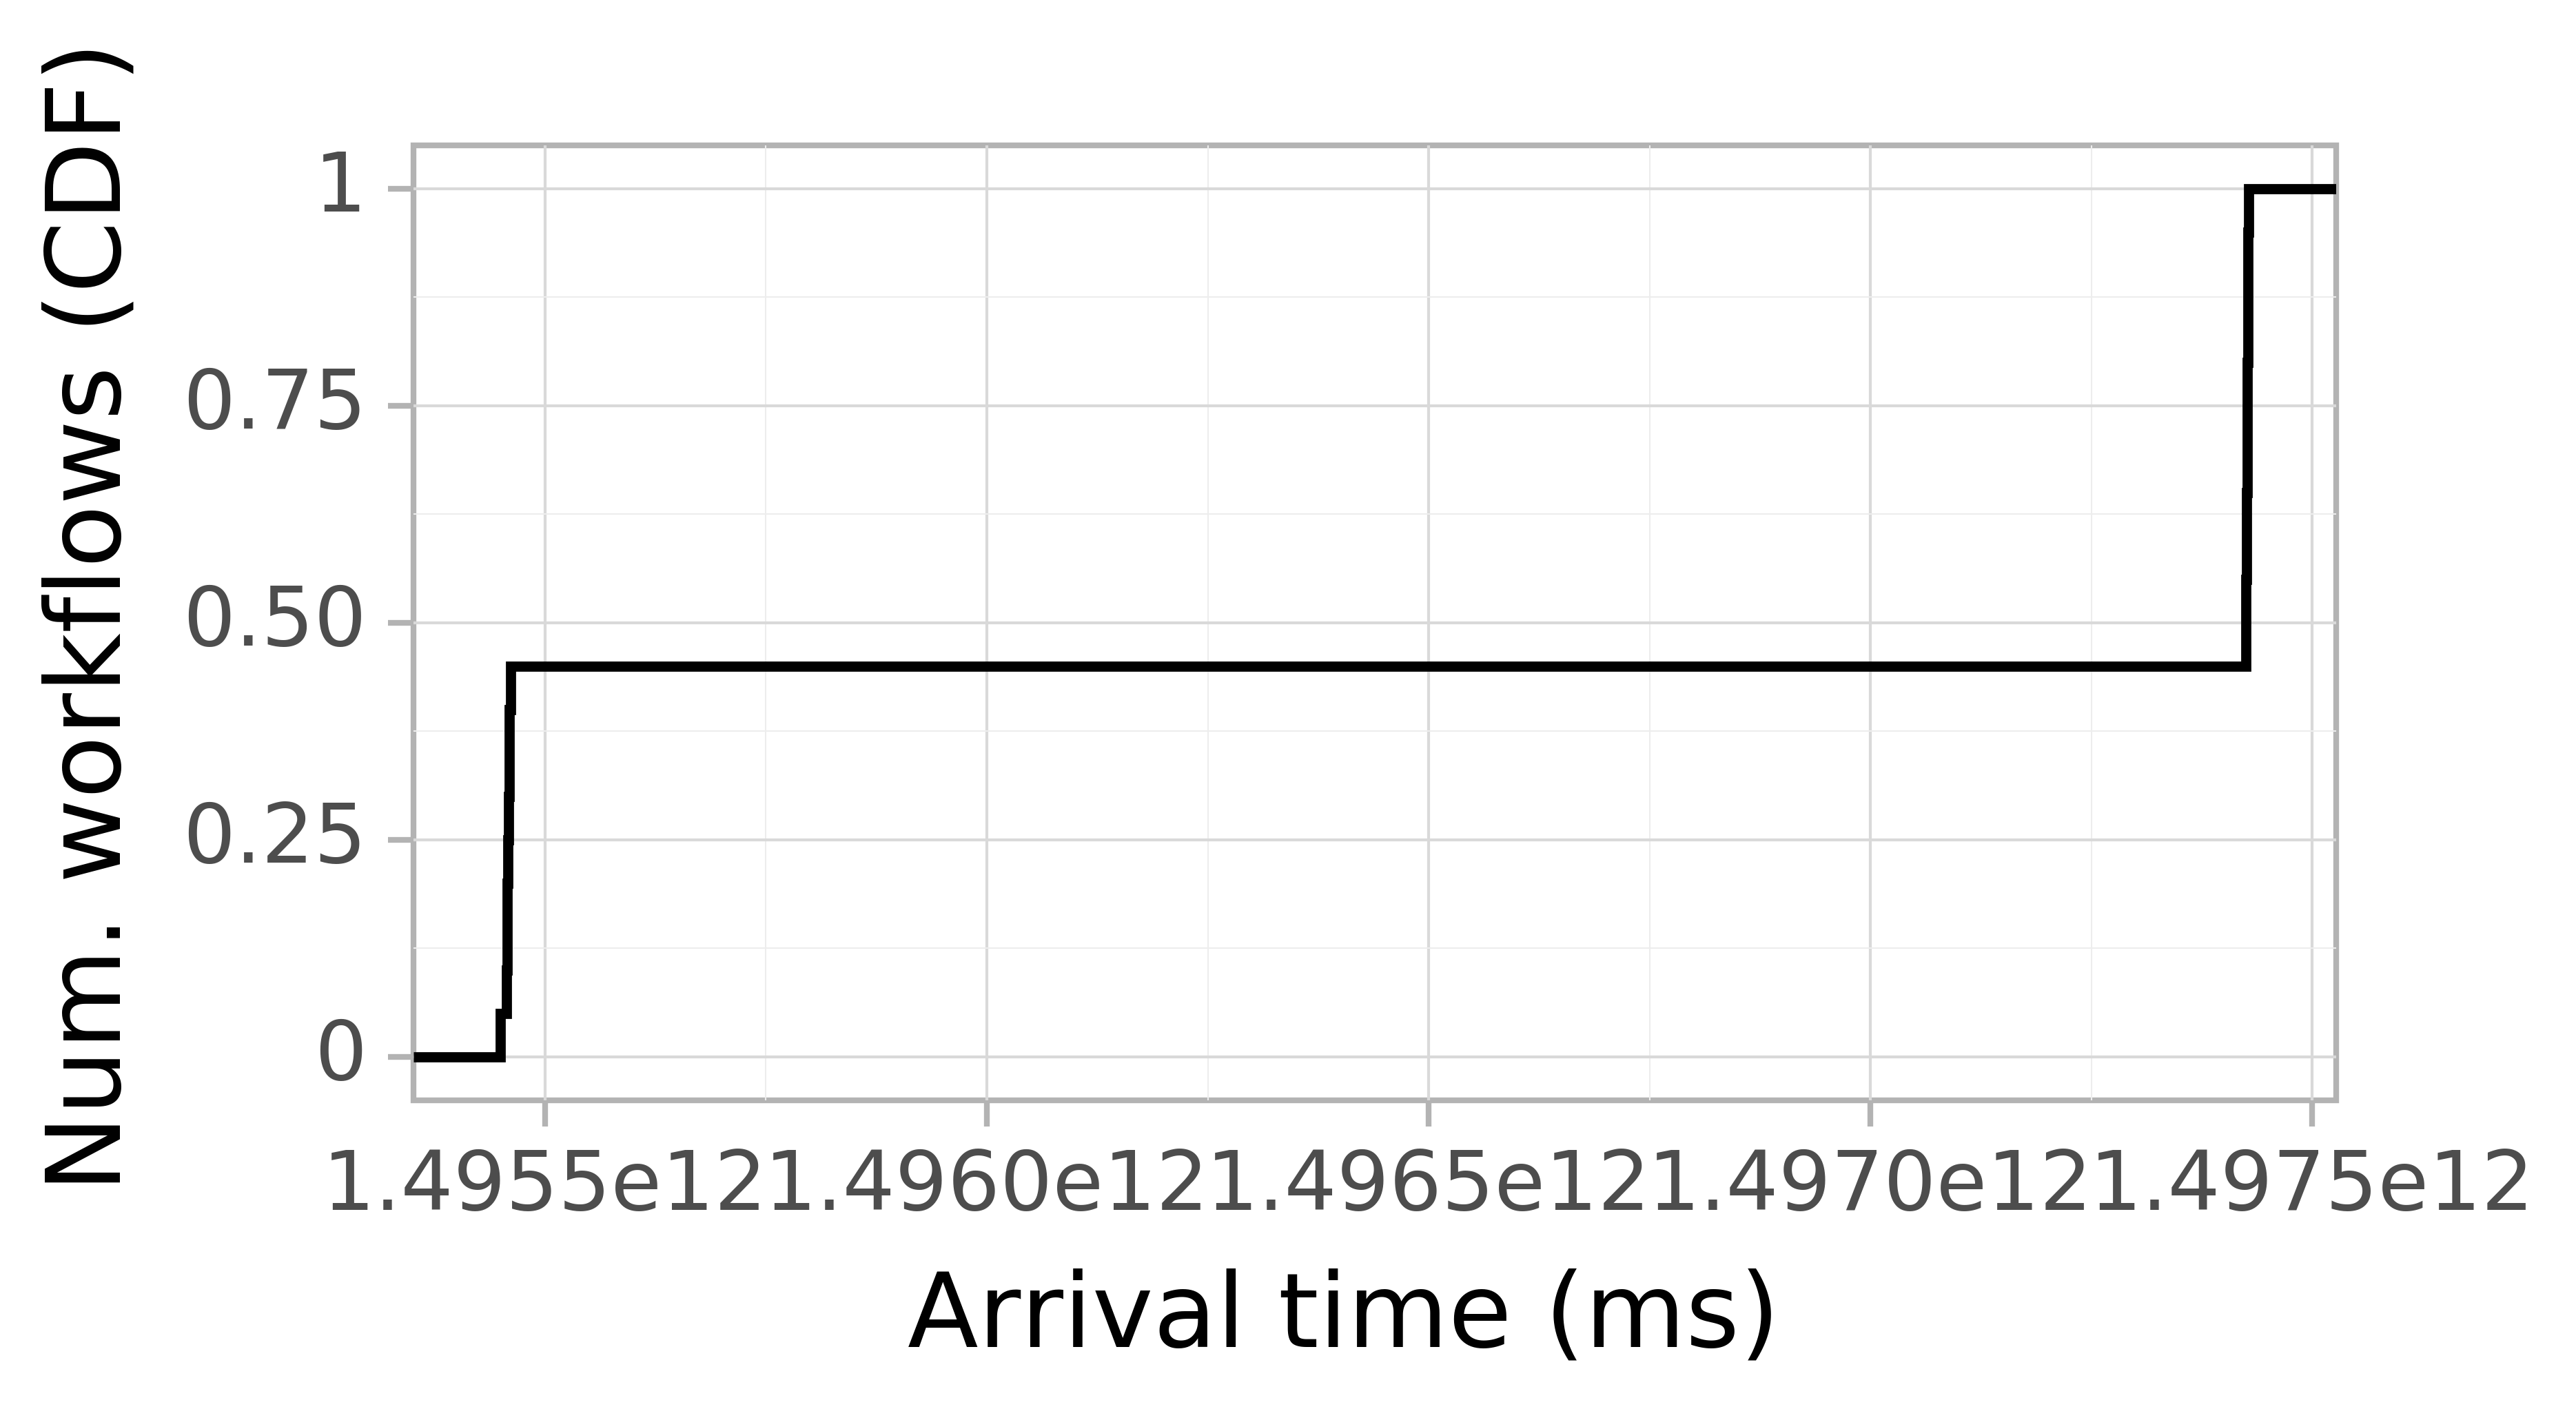 Job arrival CDF graph for the askalon-new_ee68 trace.